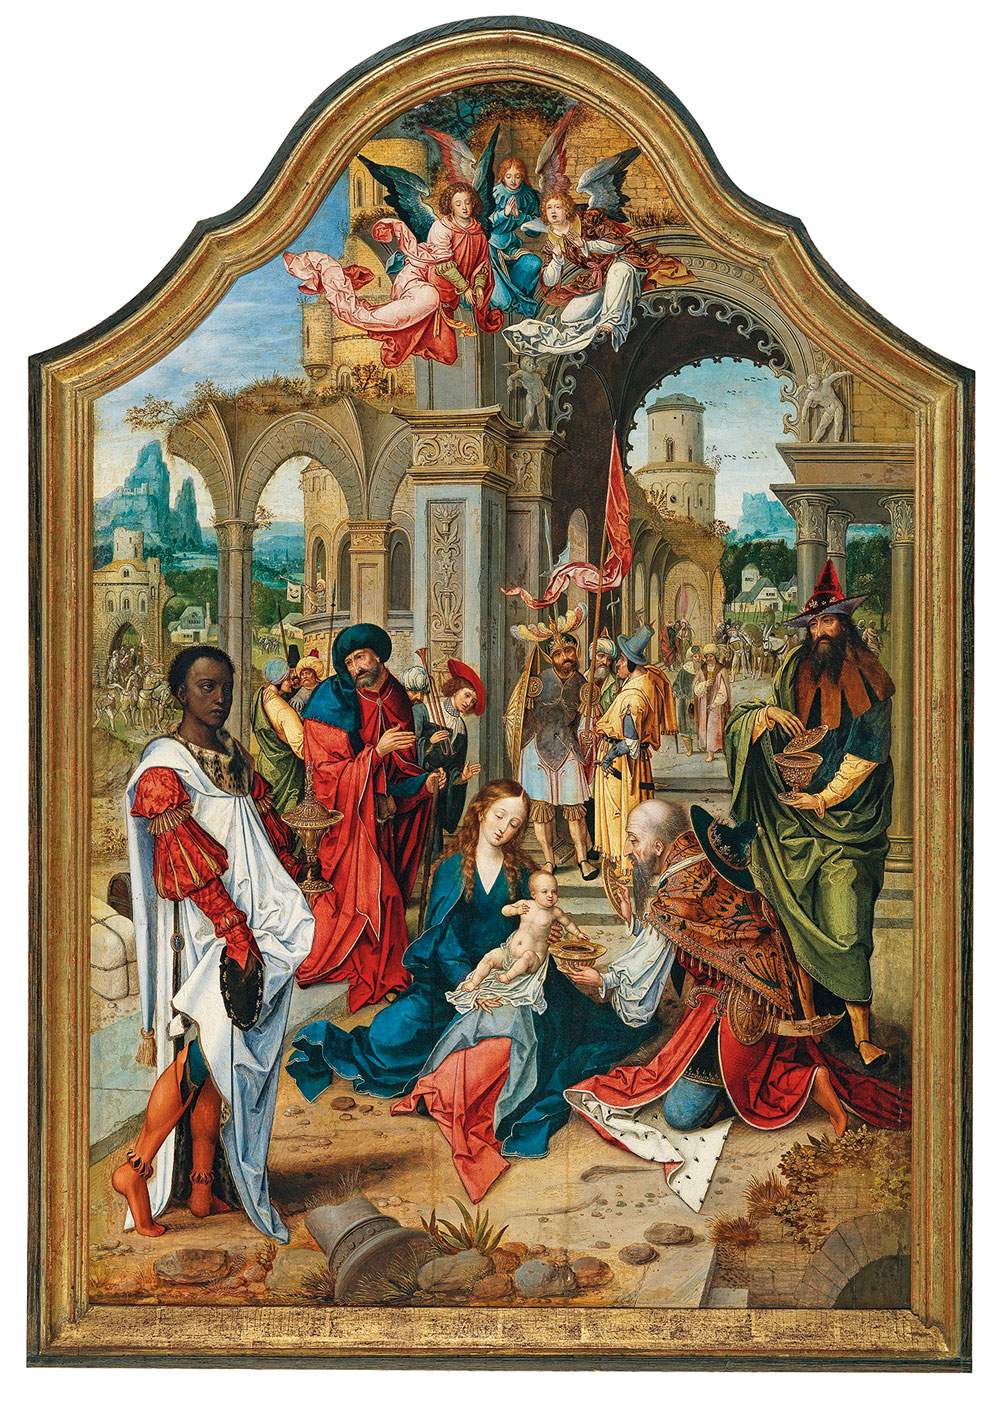 World record at Dorotheum for an altarpiece by a 16th-century Flemish painter